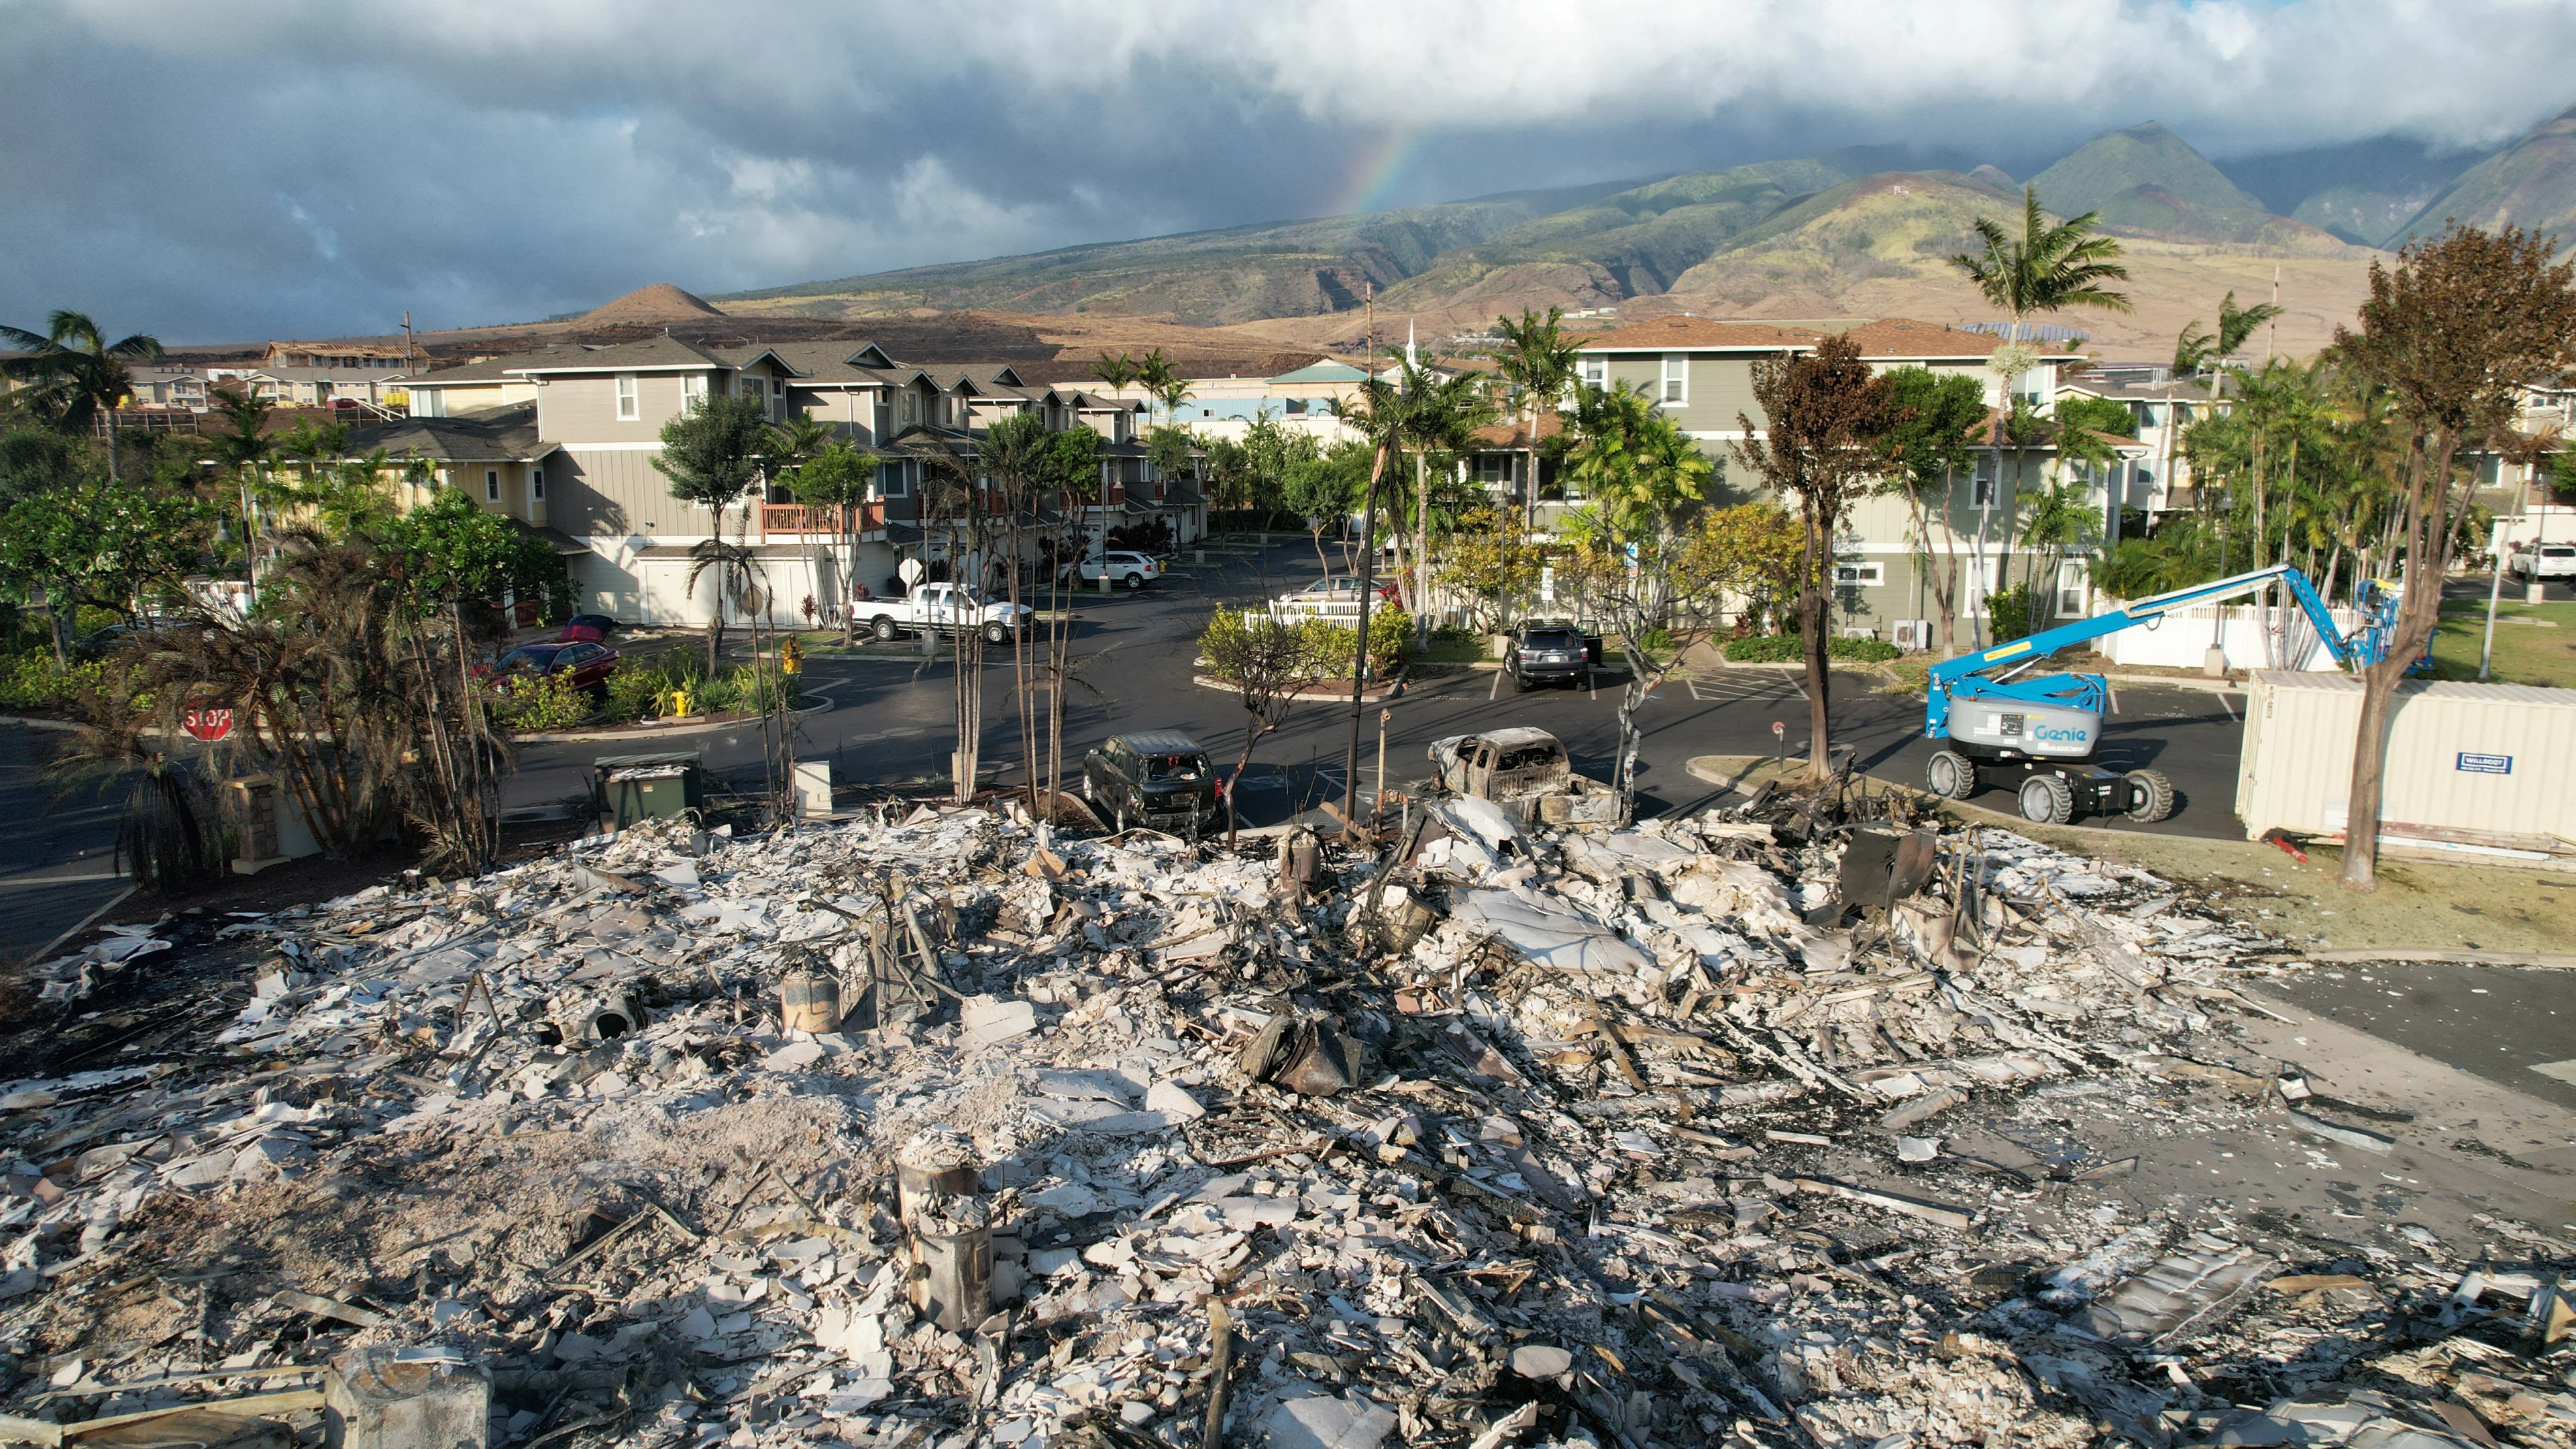 Reuters: The damage at the Ho'Onanea condominium complex is seen in the aftermath of a wildfire, in Lahaina, Maui, Hawaii, U.S. August 10, 2023. REUTERS/Alan Devall